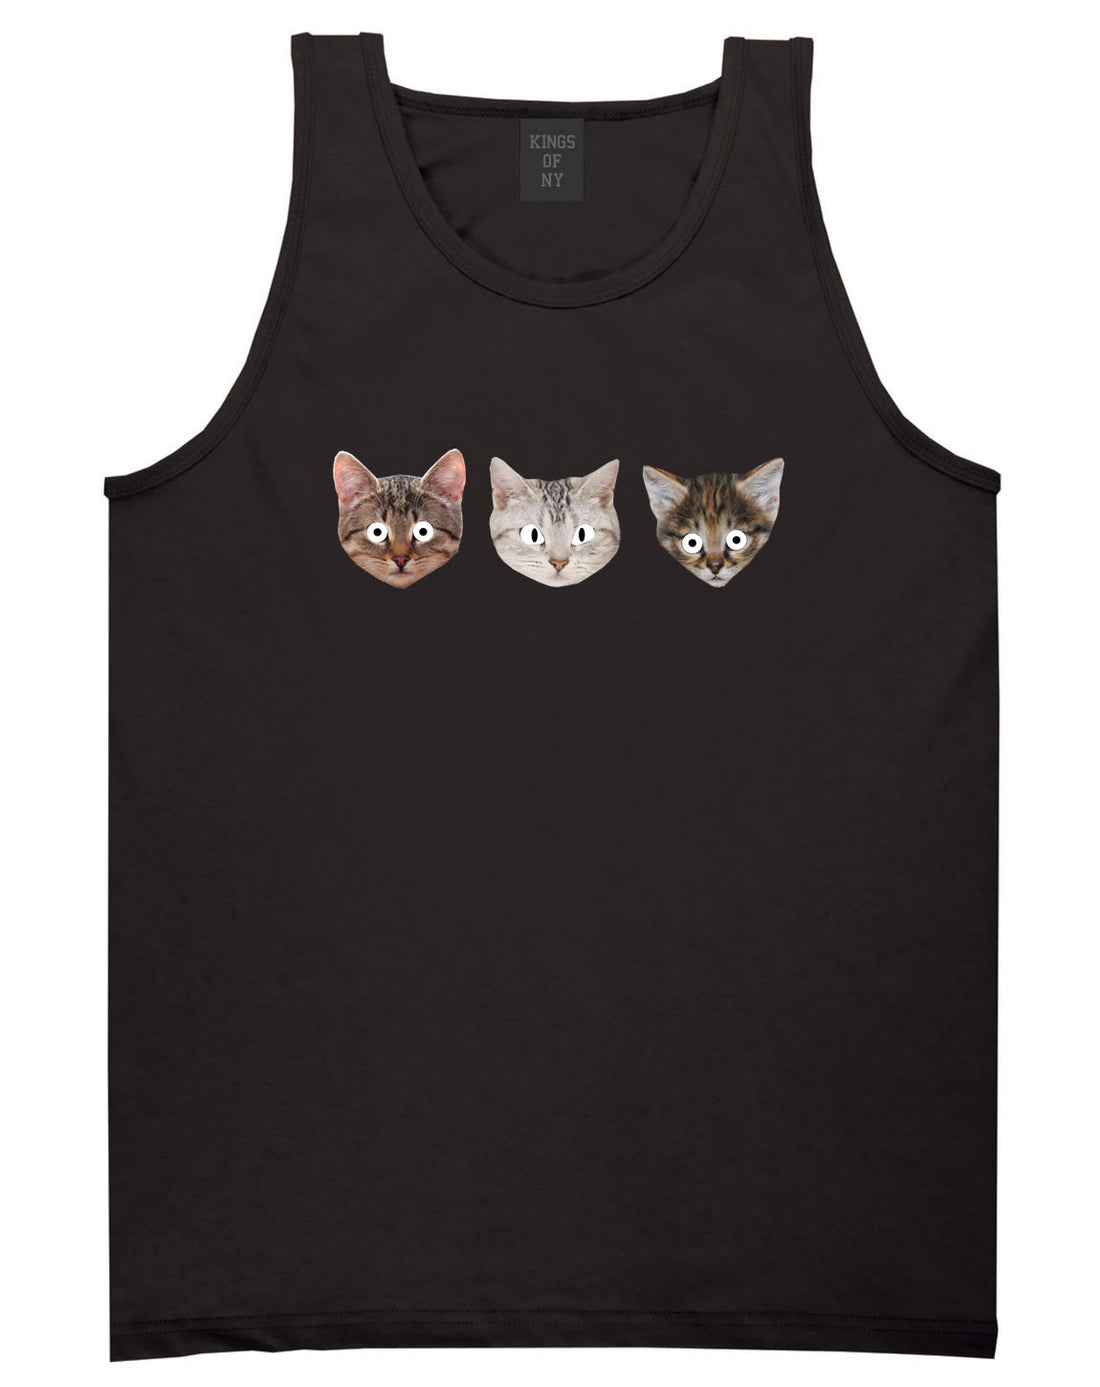 Cats Crazy Kittens Tank Top in Black By Kings Of NY